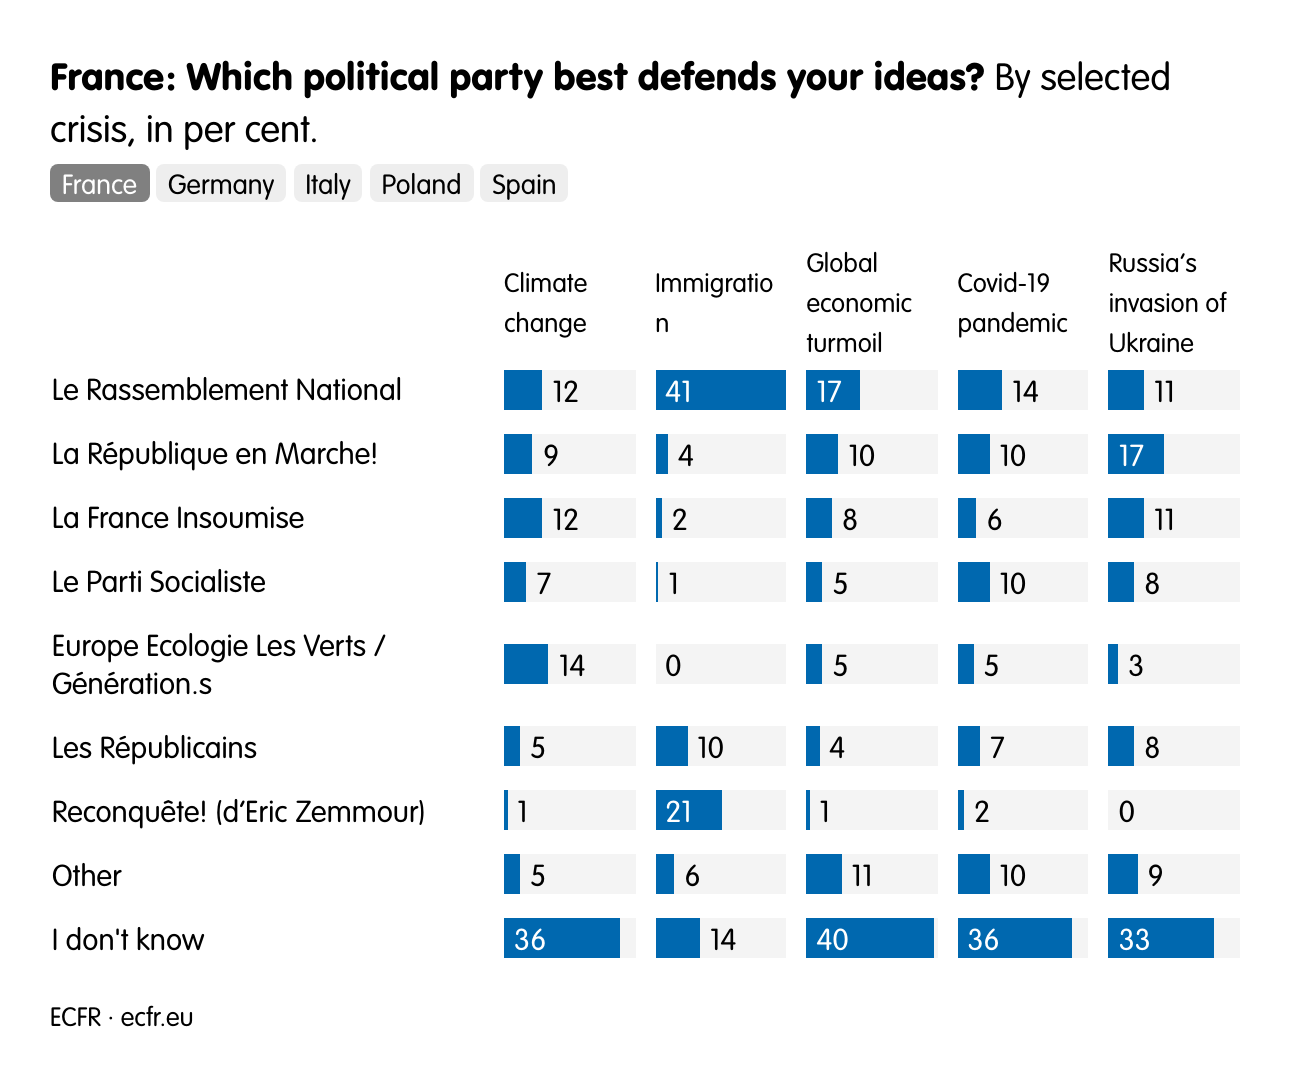 France: Which political party best defends your ideas?